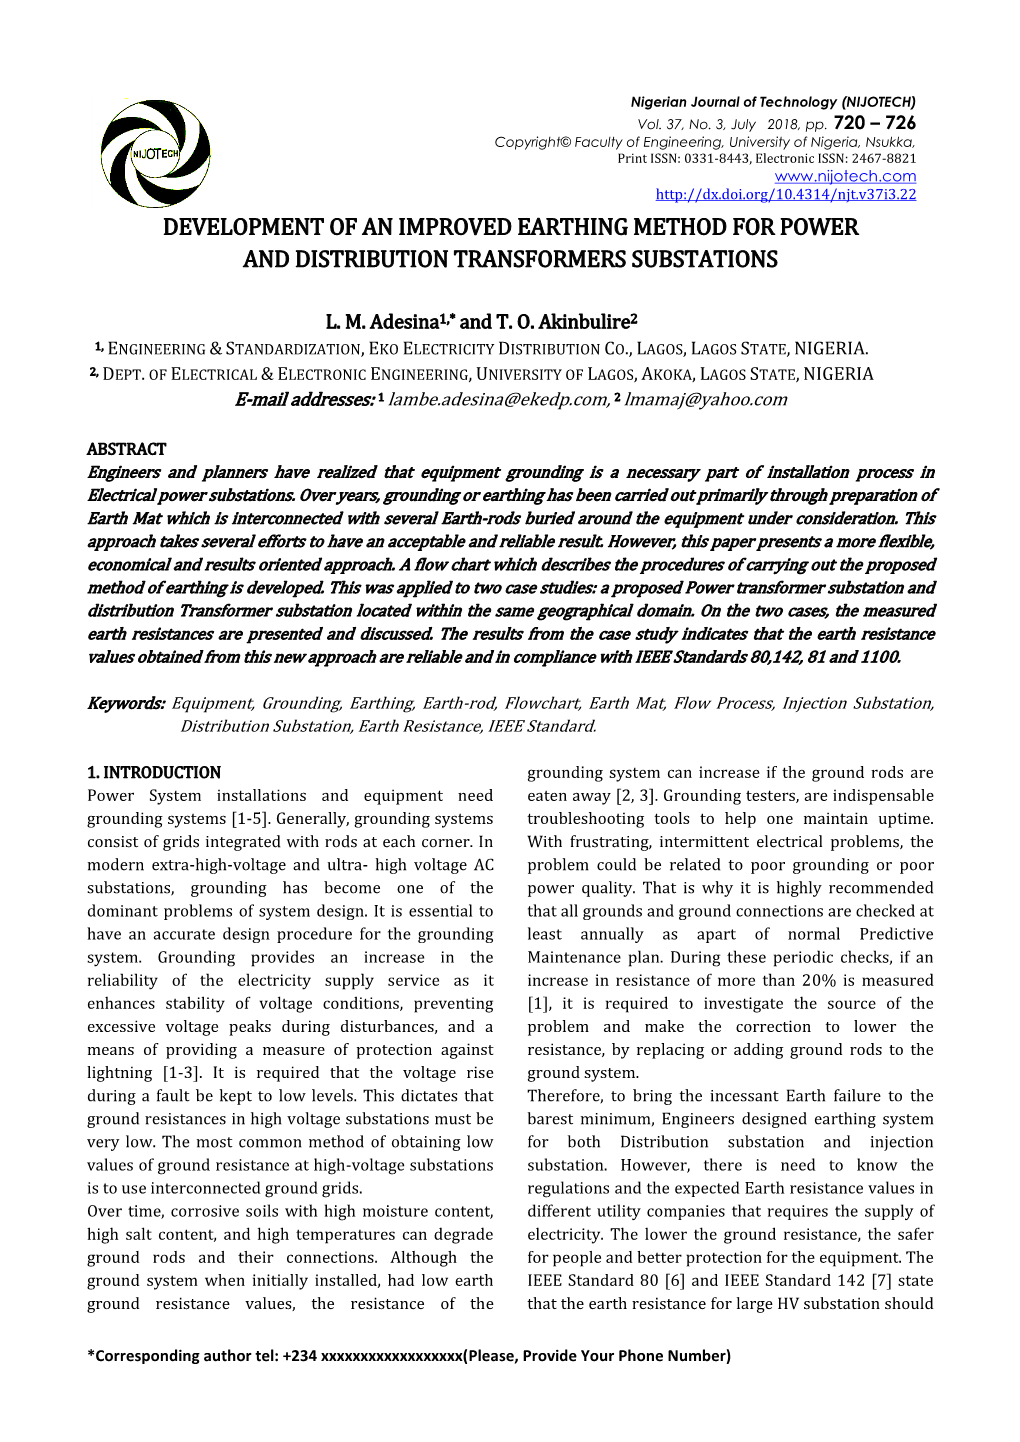 Development of an Improved Earthing Method for Power and Distribution Transformers Substations